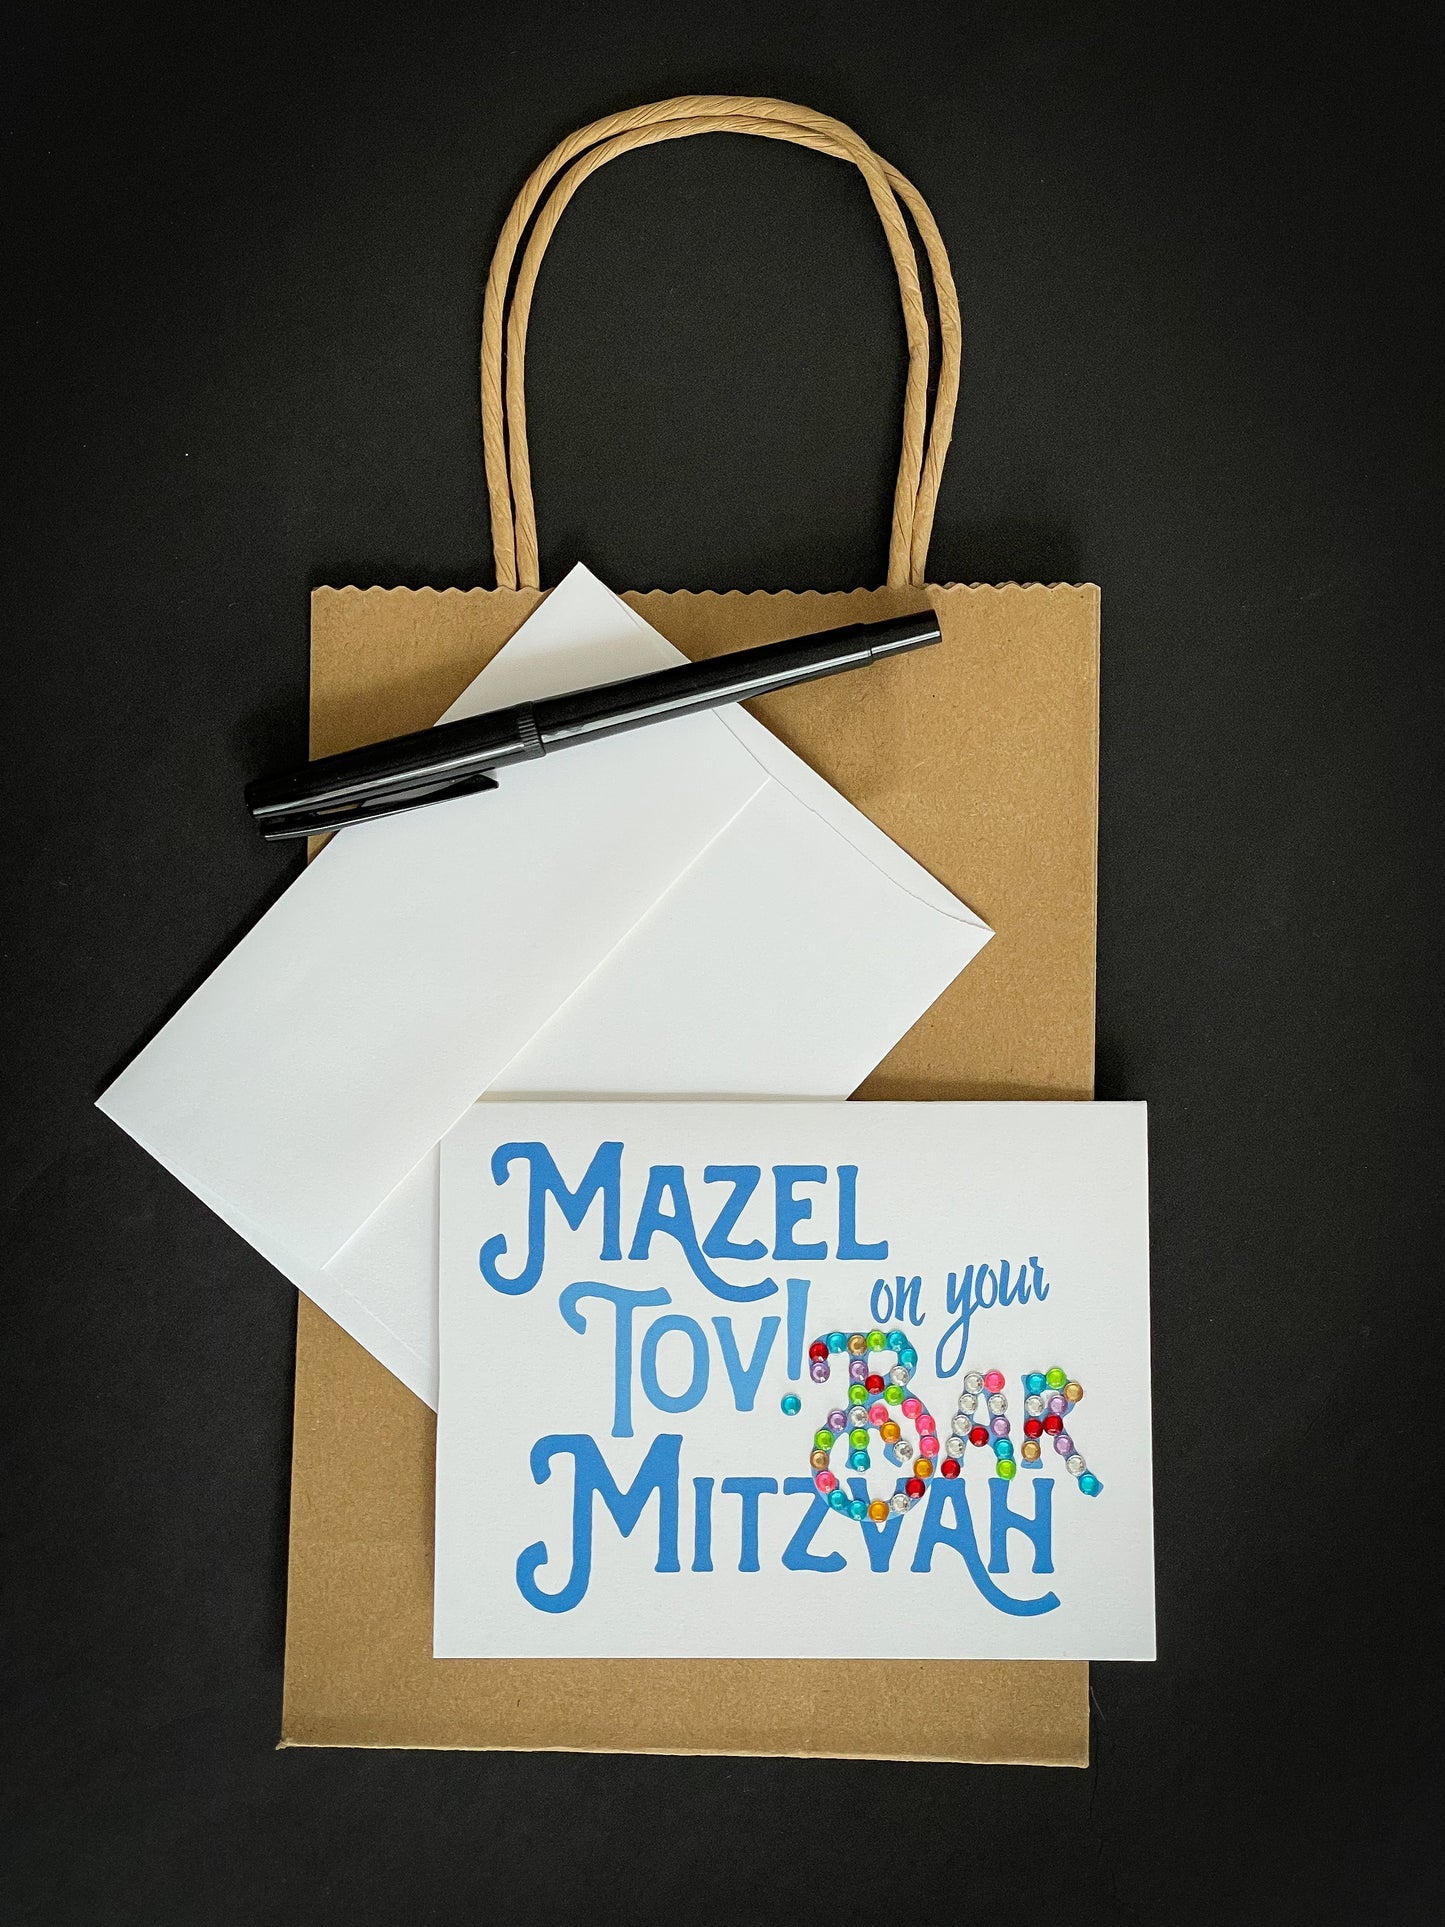 this is a note card on a craft paper gift bag with a white envelope and a black marker , the card says Mazel Tov on your bar mitzvah in blue